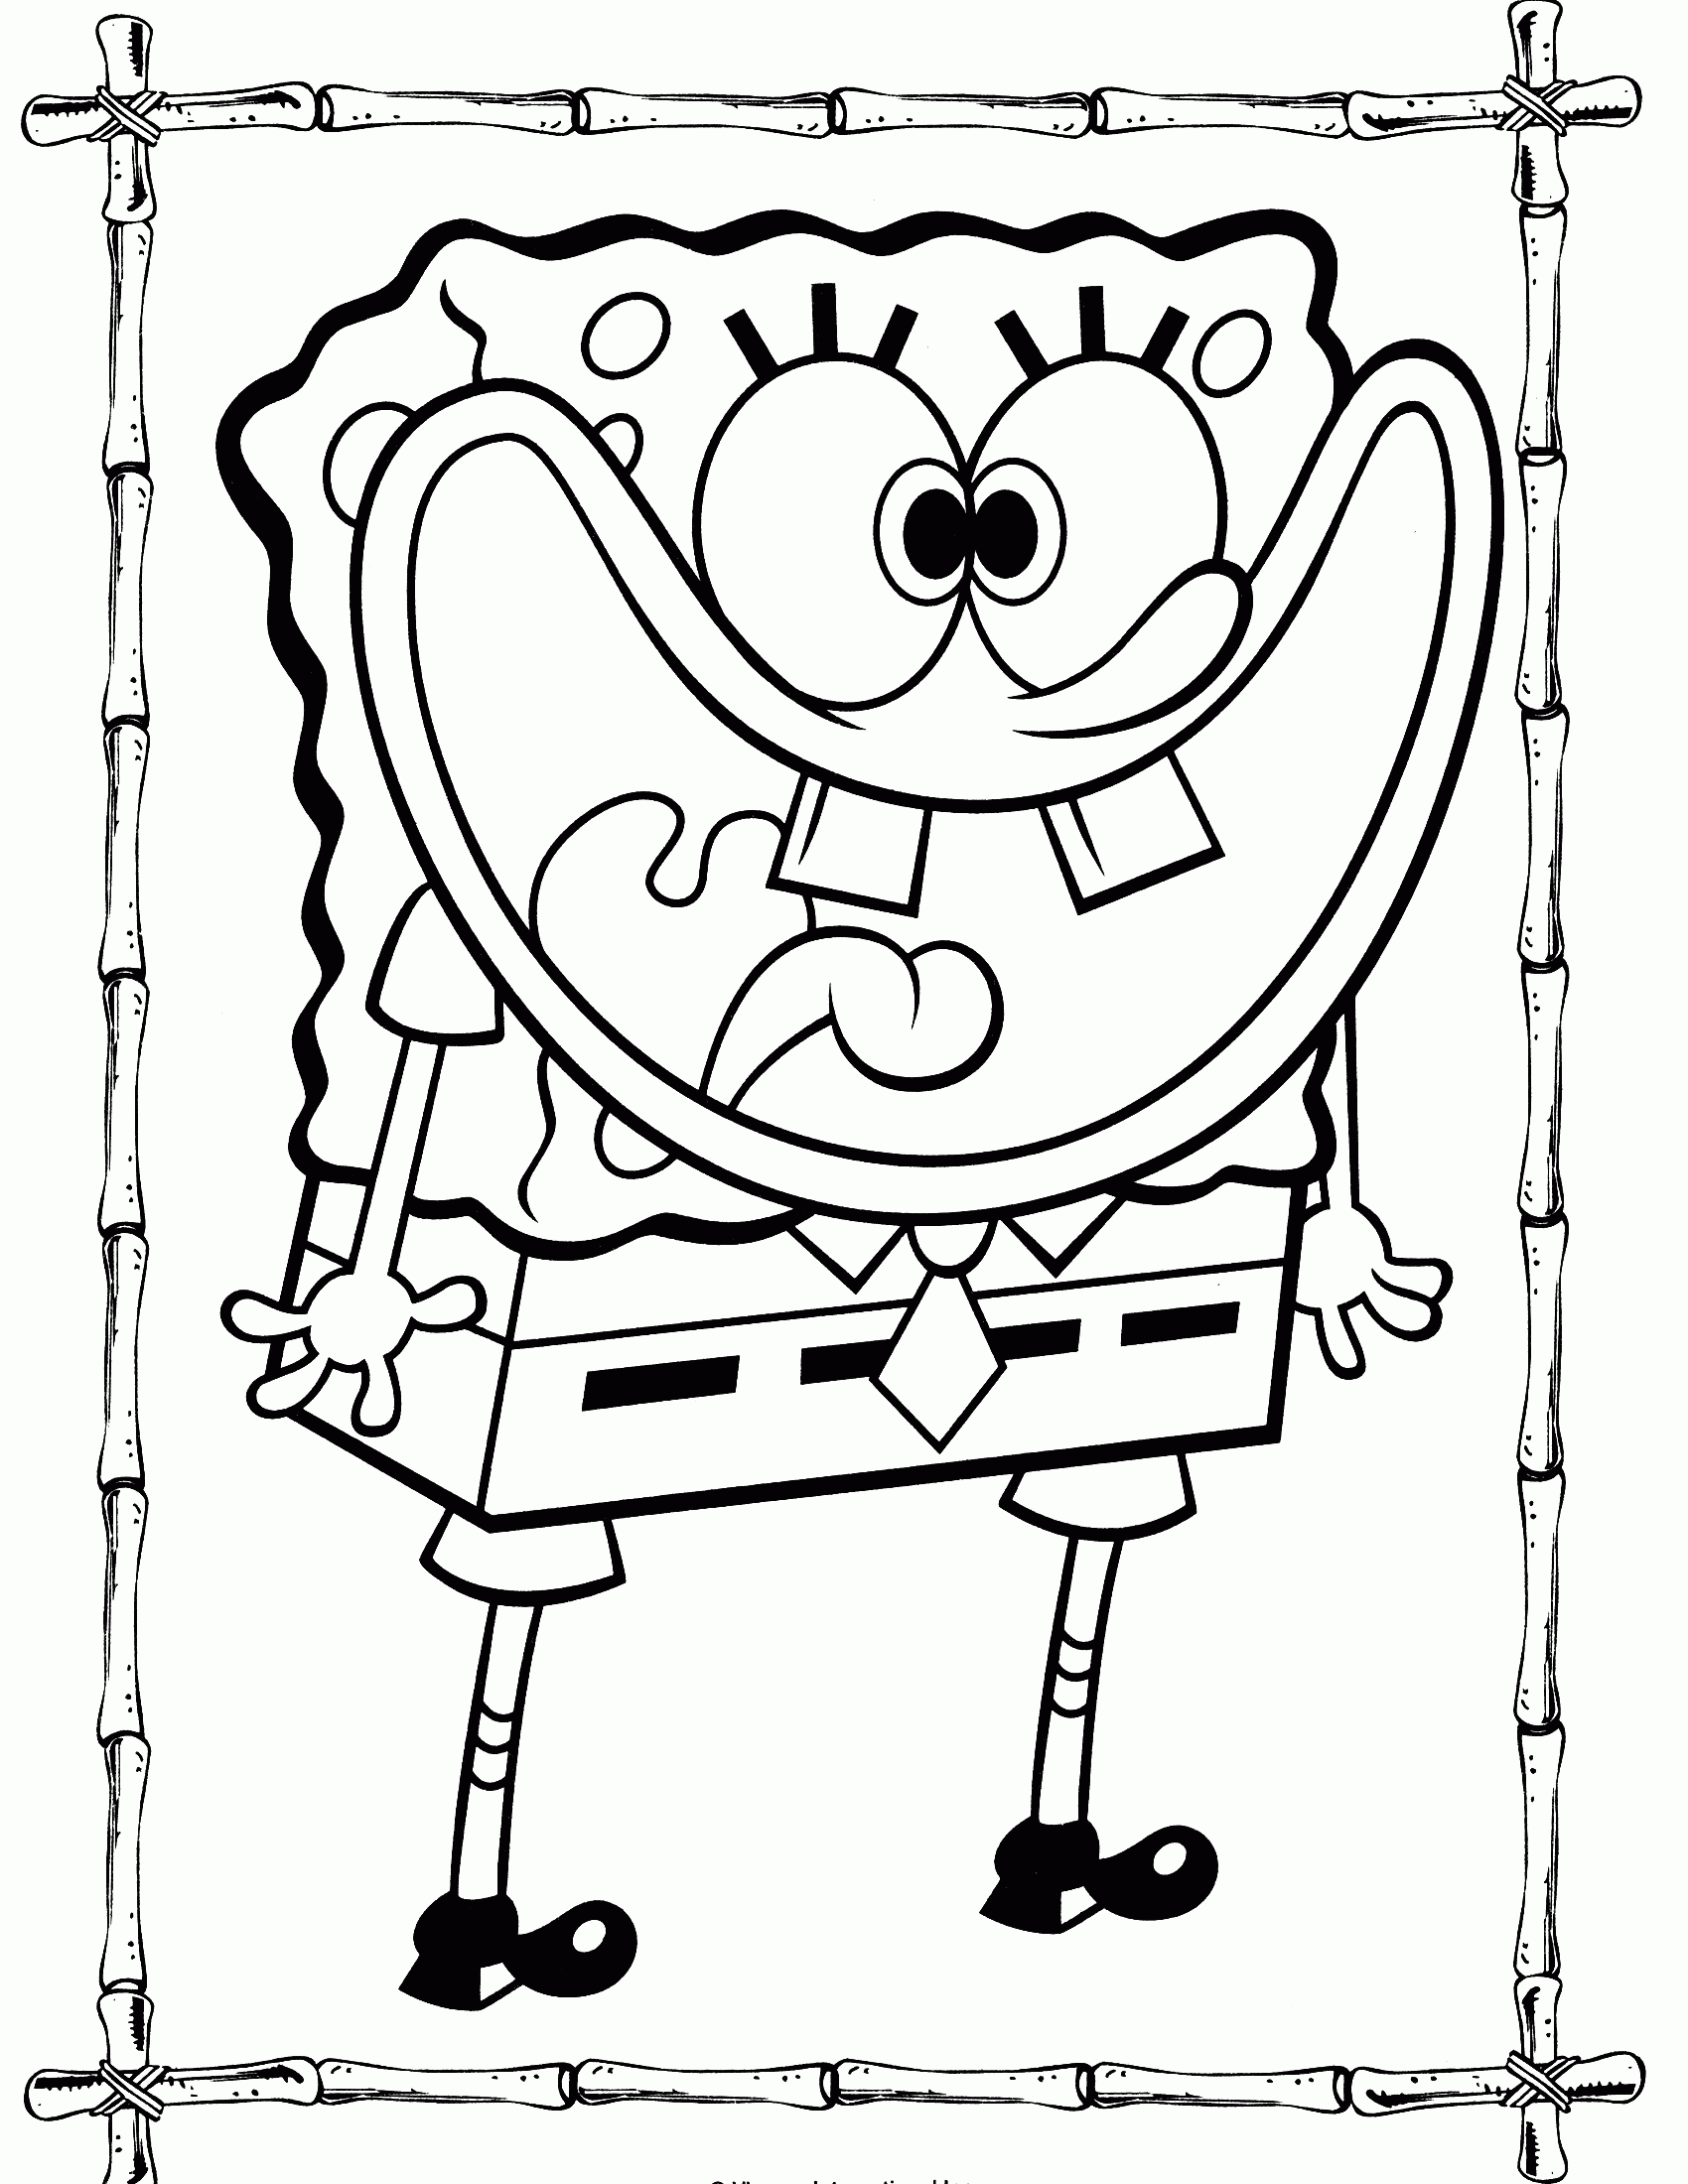 Spongebob Squarepants Easter Coloring Pages - Coloring Page